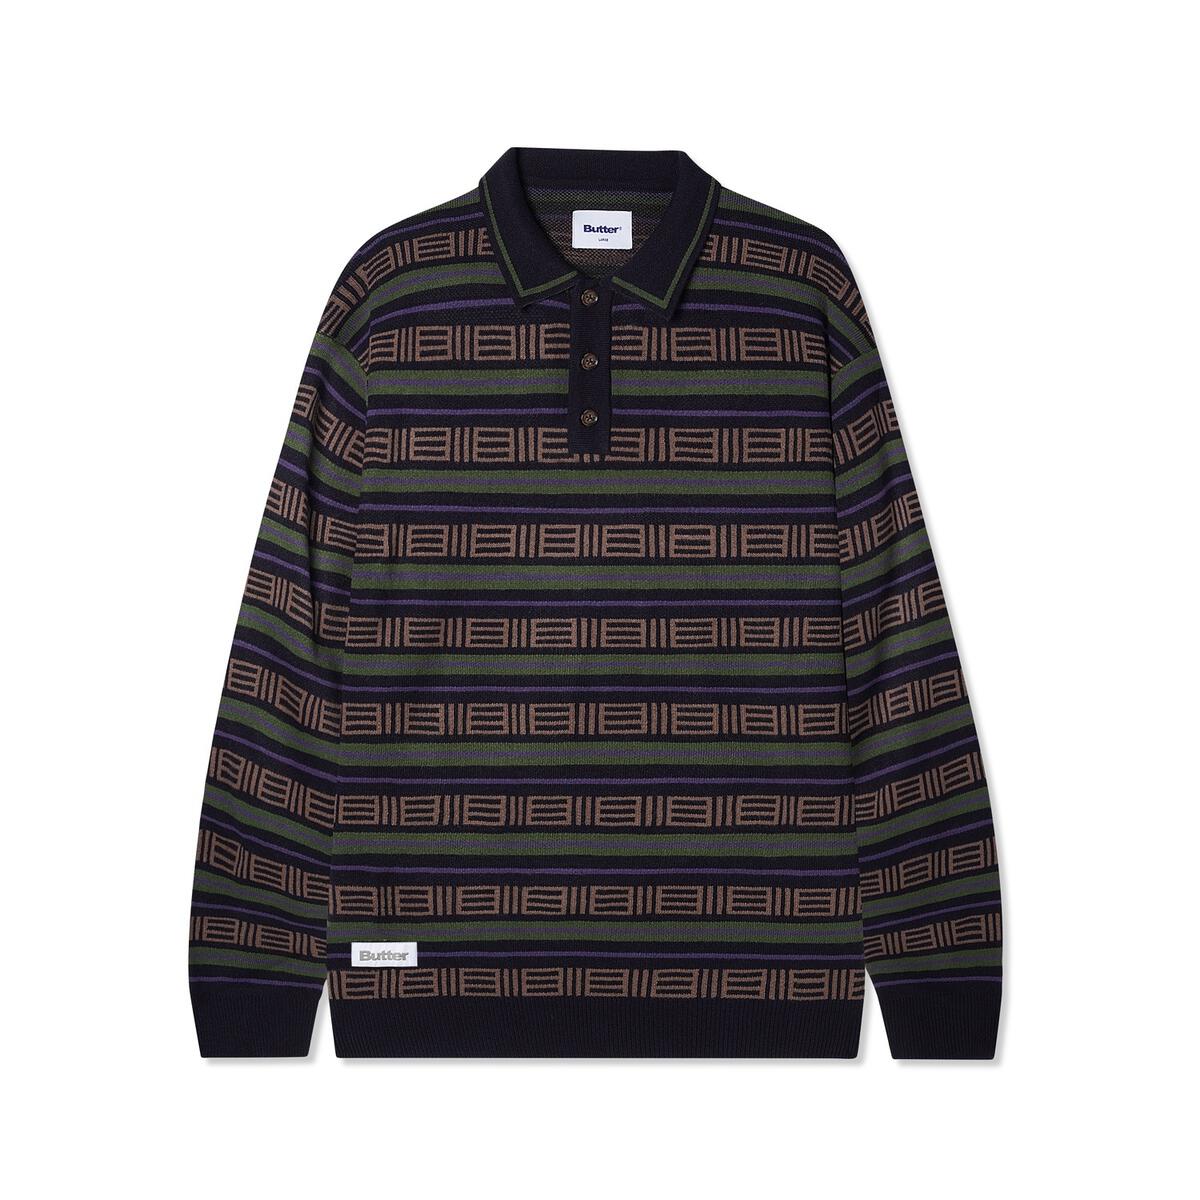 Butter Goods Windsor Knitted Sweater Navy/Forest